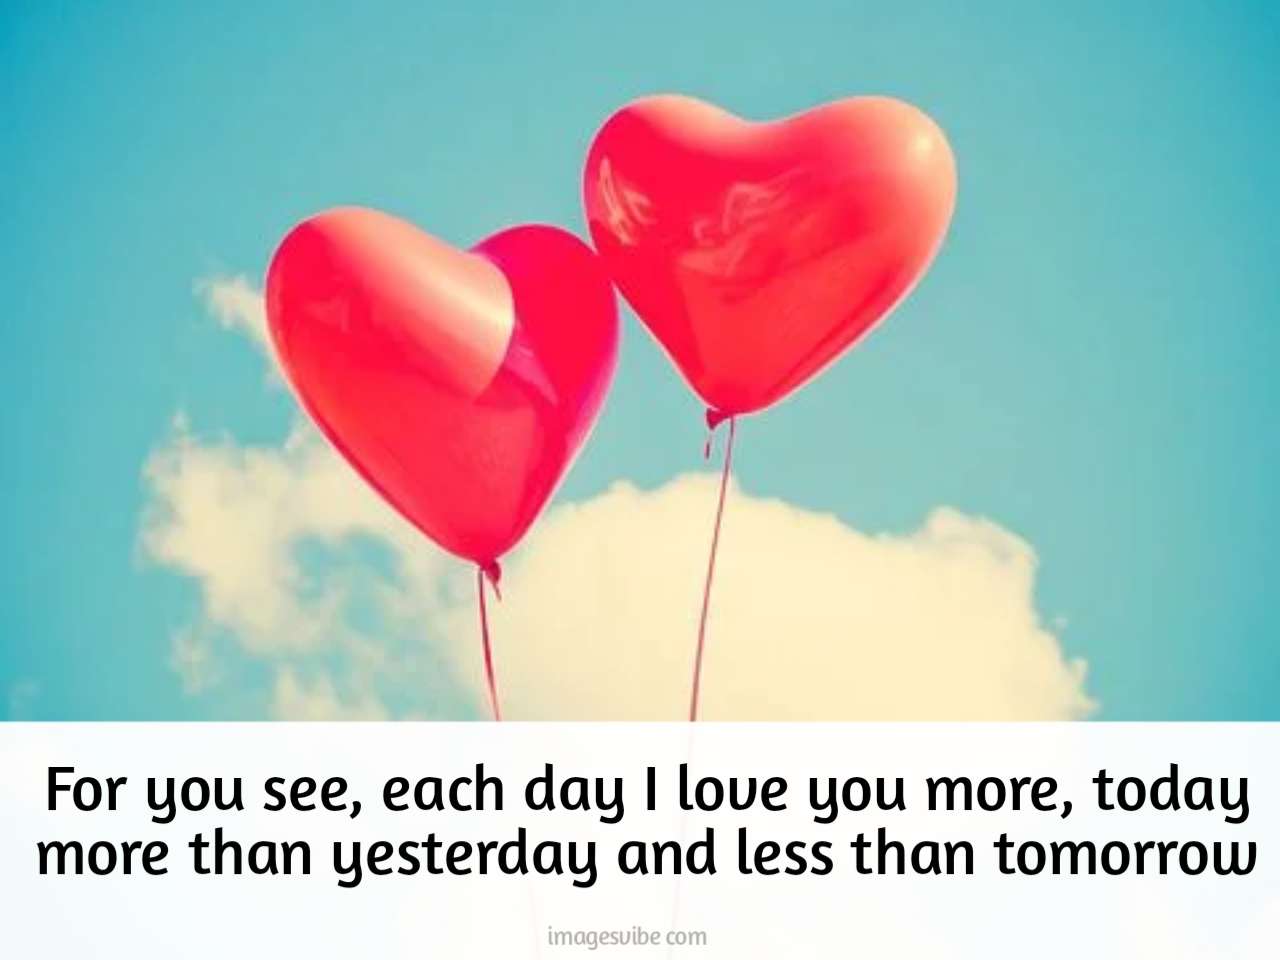 Romantic Images With Quotes25 